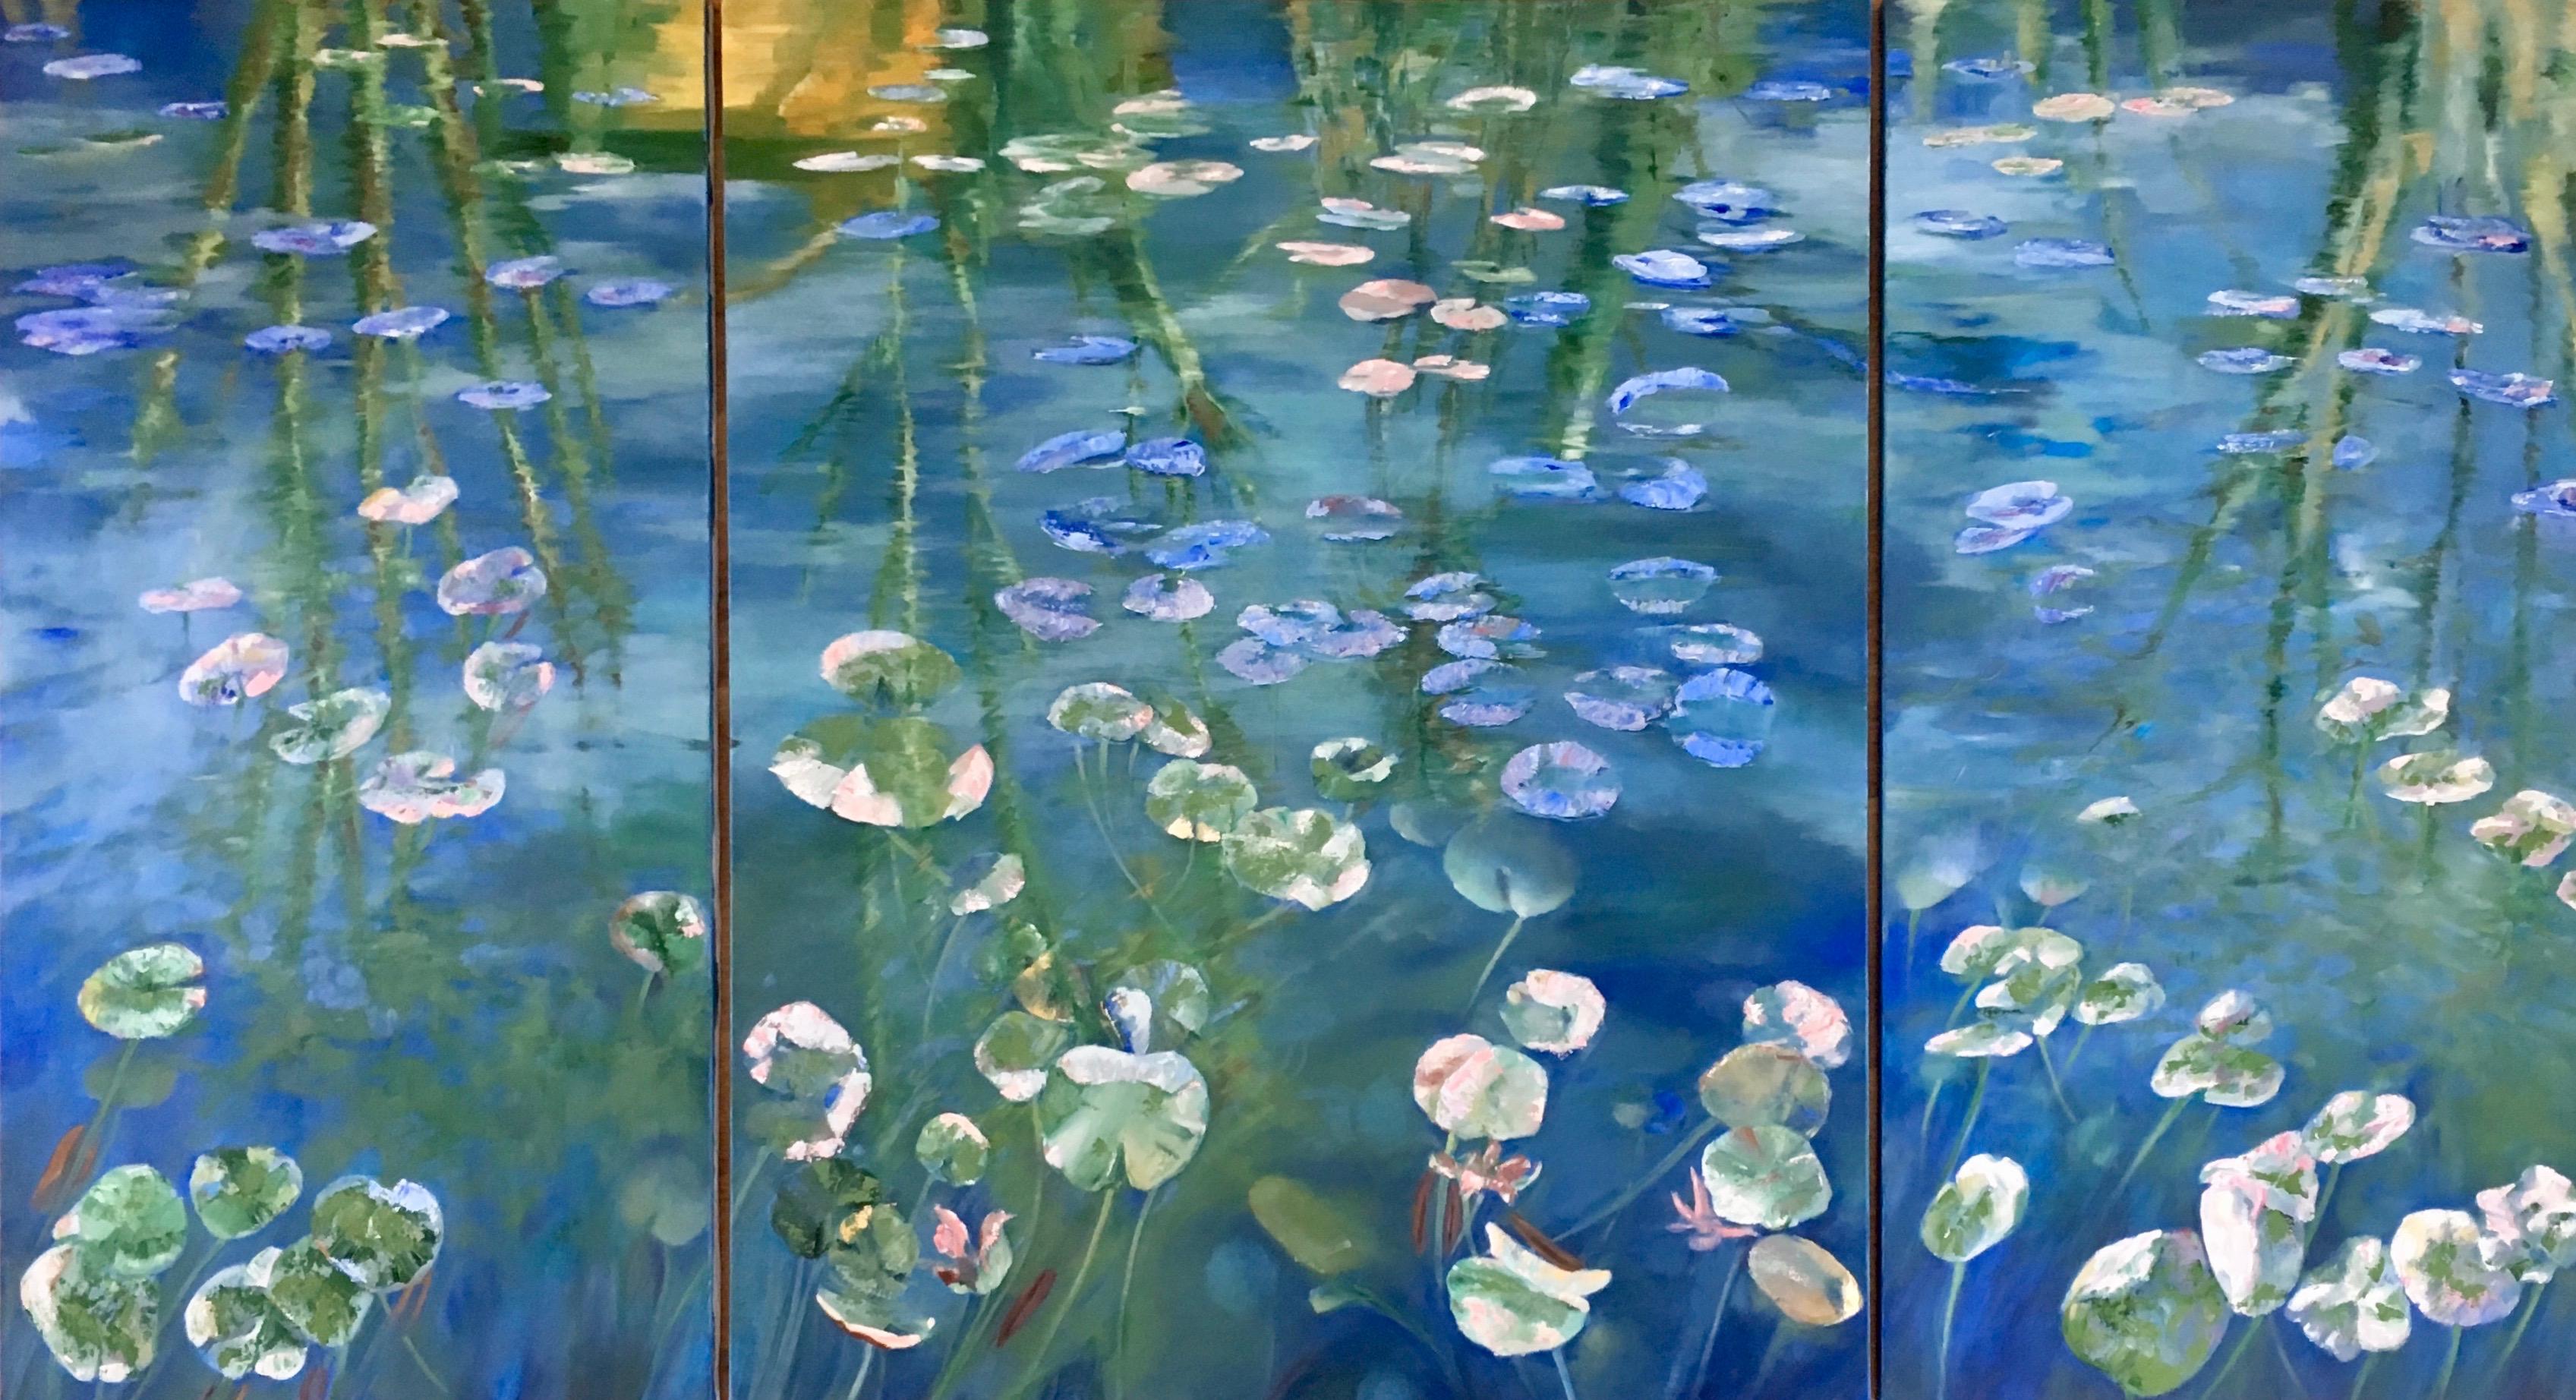 The Waterlilies Right - Abstract Impressionist Painting by Leith Ridley